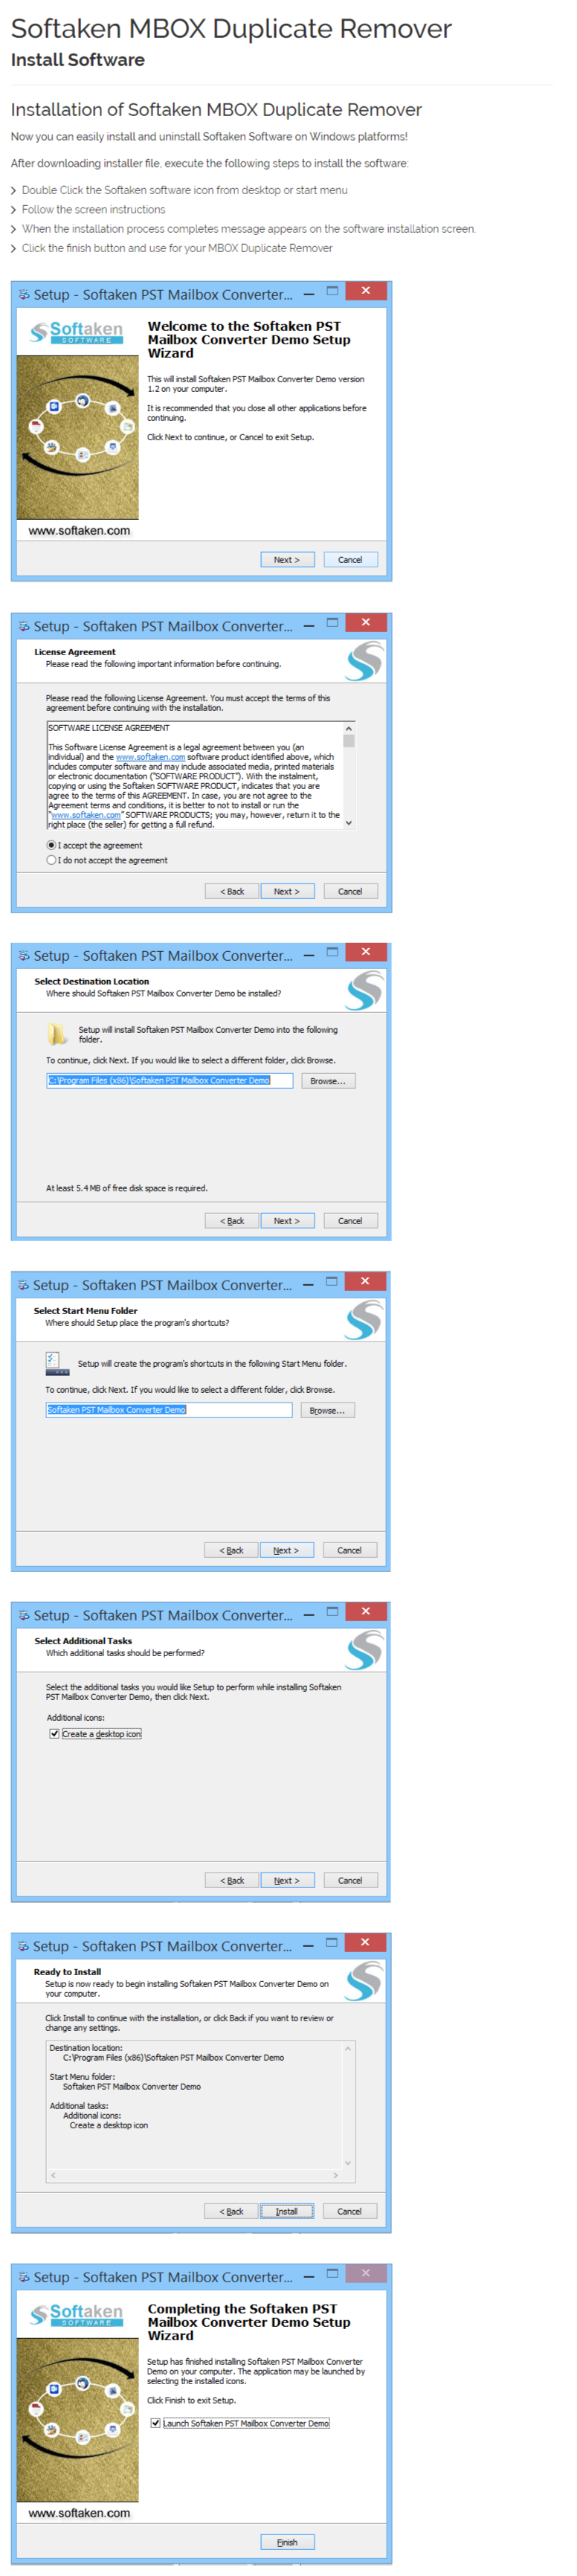 MBOX Duplicate Remover Installation